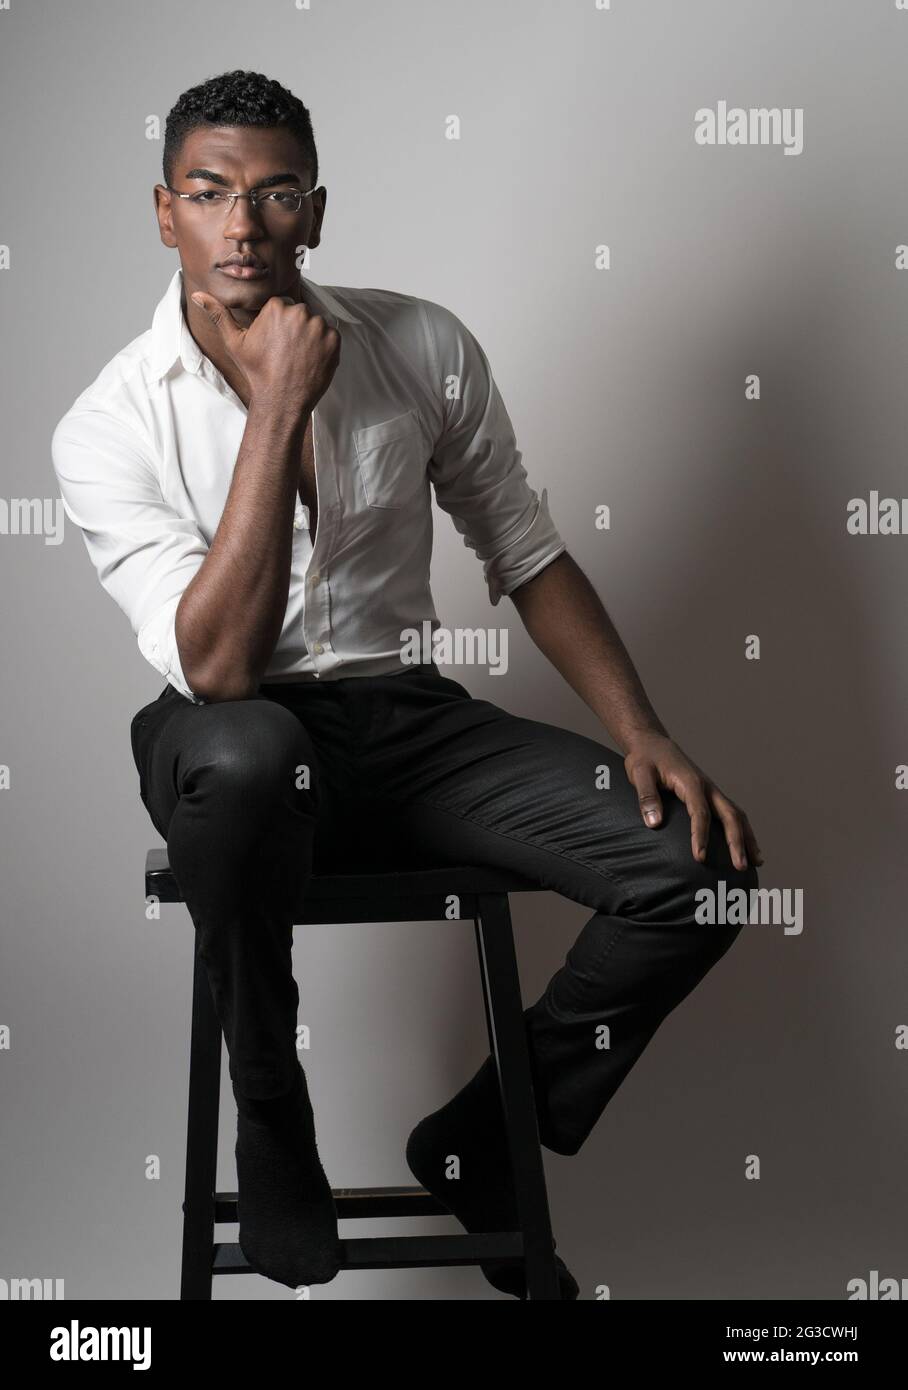 A young black male wearing glasses, a fashion model, sitting on a wooden stool posing with his hand to his chin, a serious portrait. Stock Photo